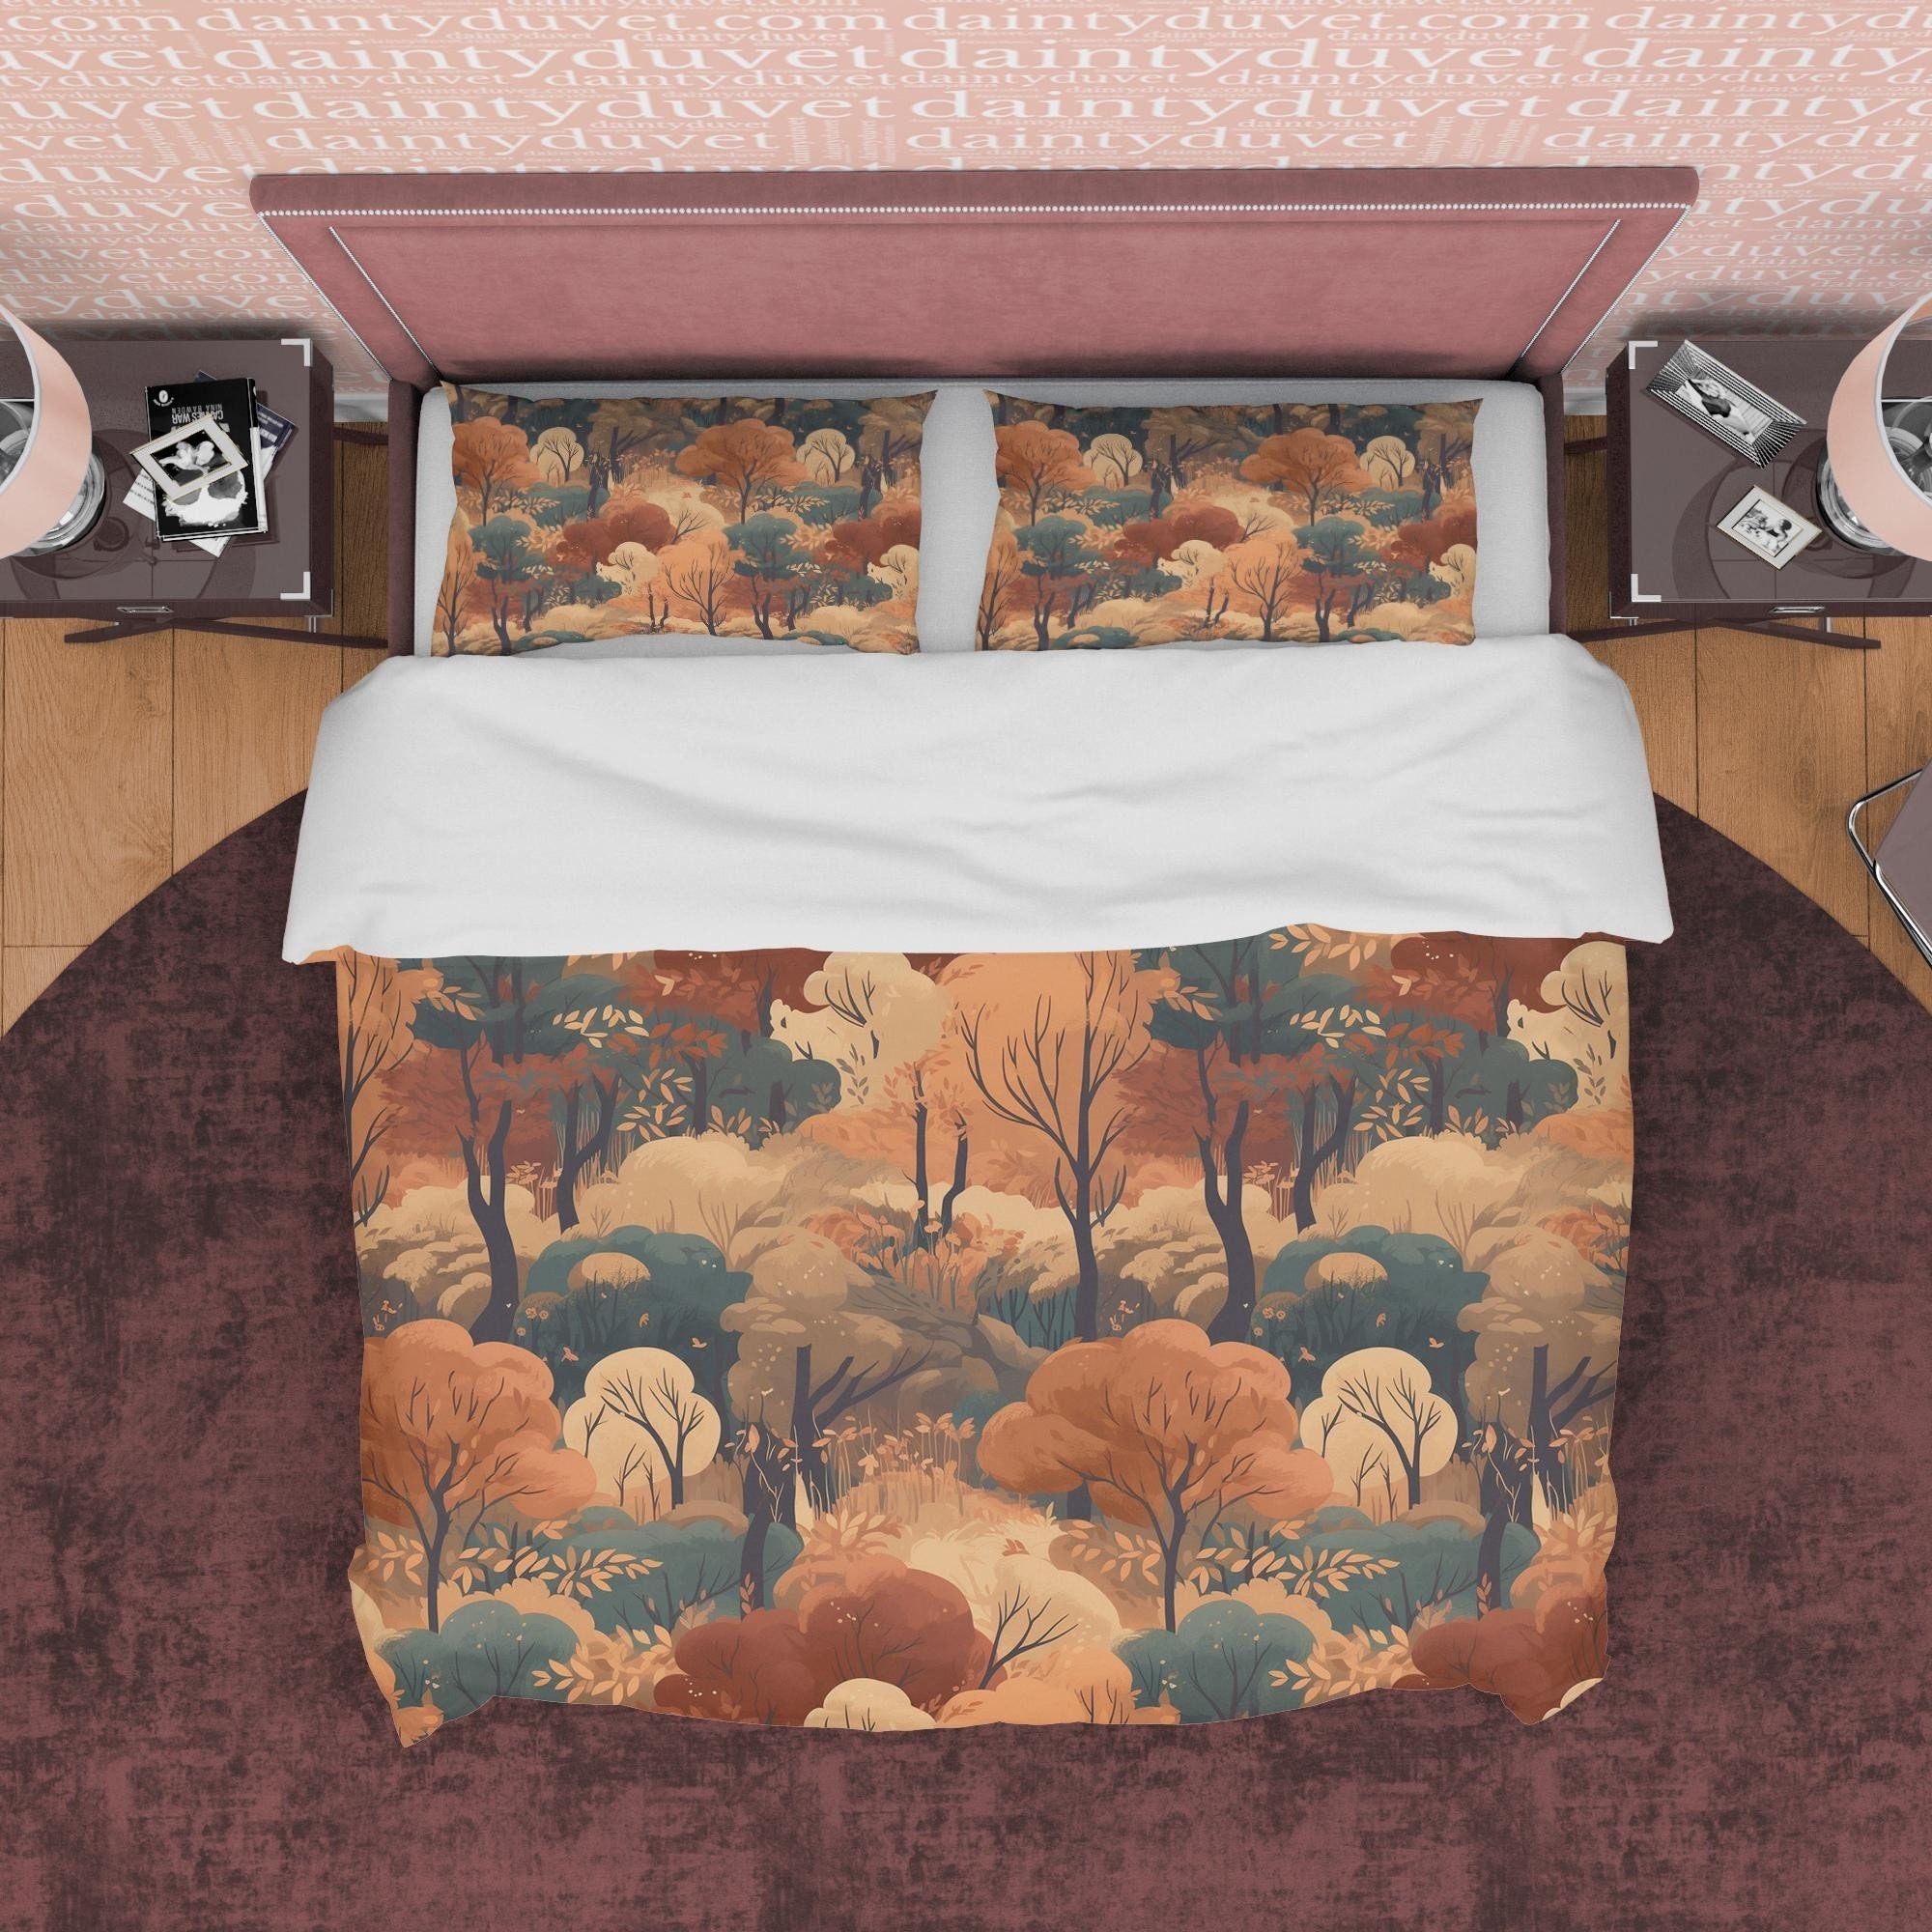 Dried Forest Rustic Duvet Cover Fall Bedding Set, Warm Autumn Colors Printed Quilt Cover, Foliage Bedspread, Boho Brown Blanket Cover